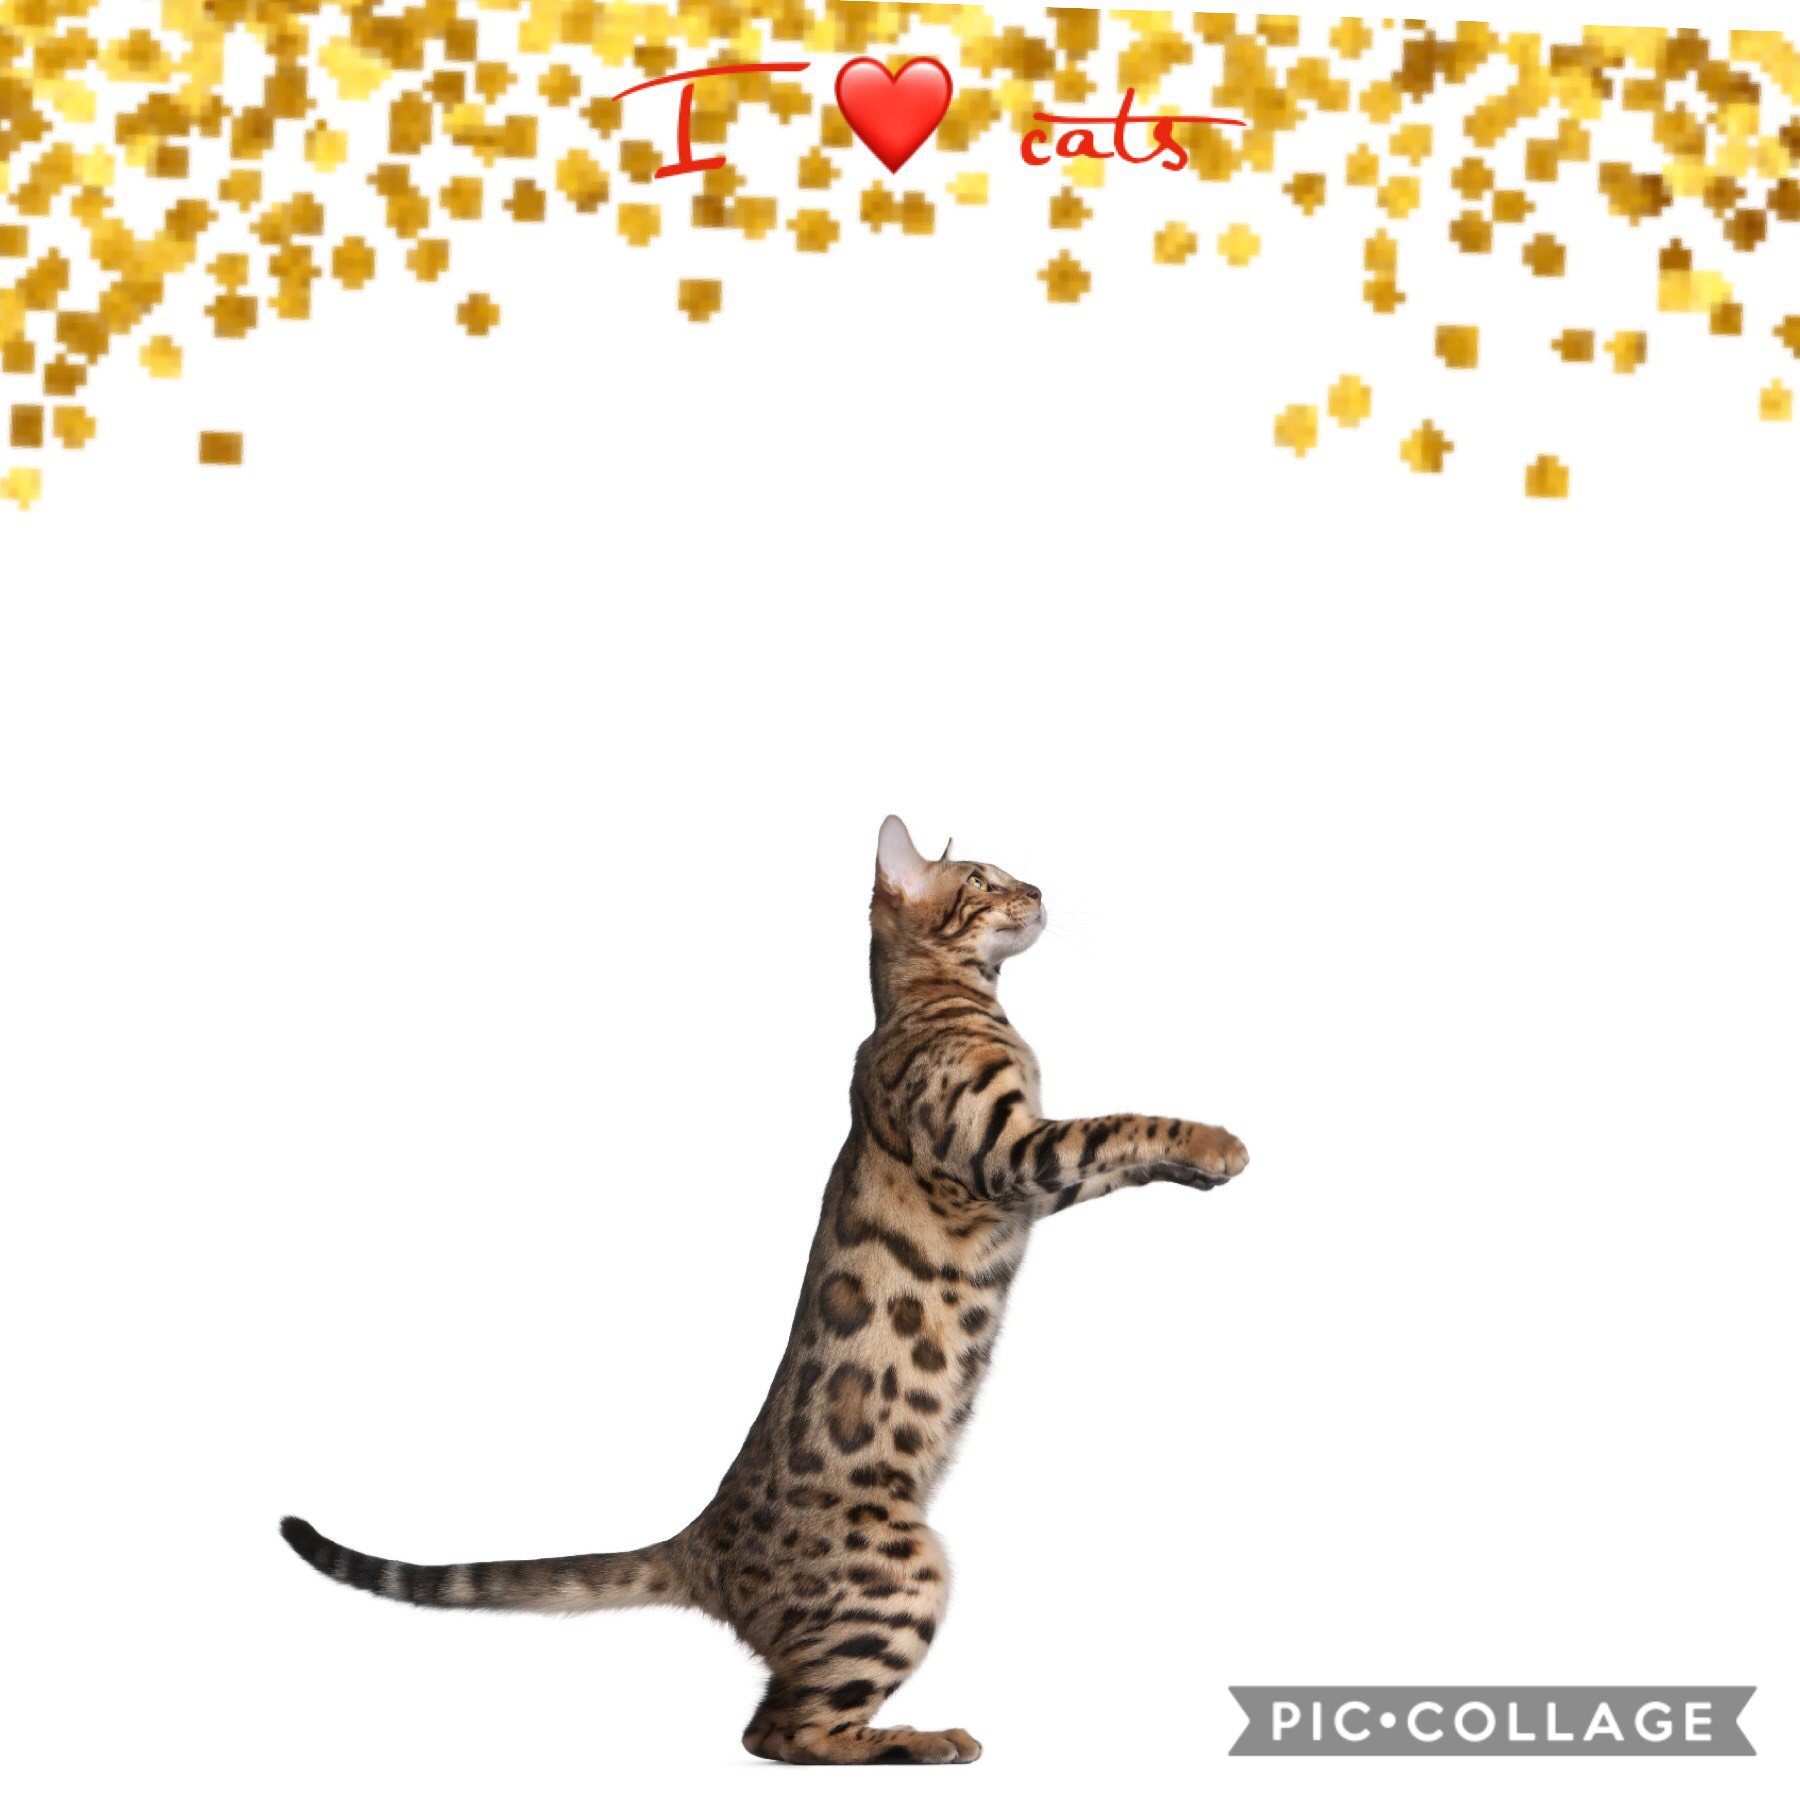 Comment if you like cats